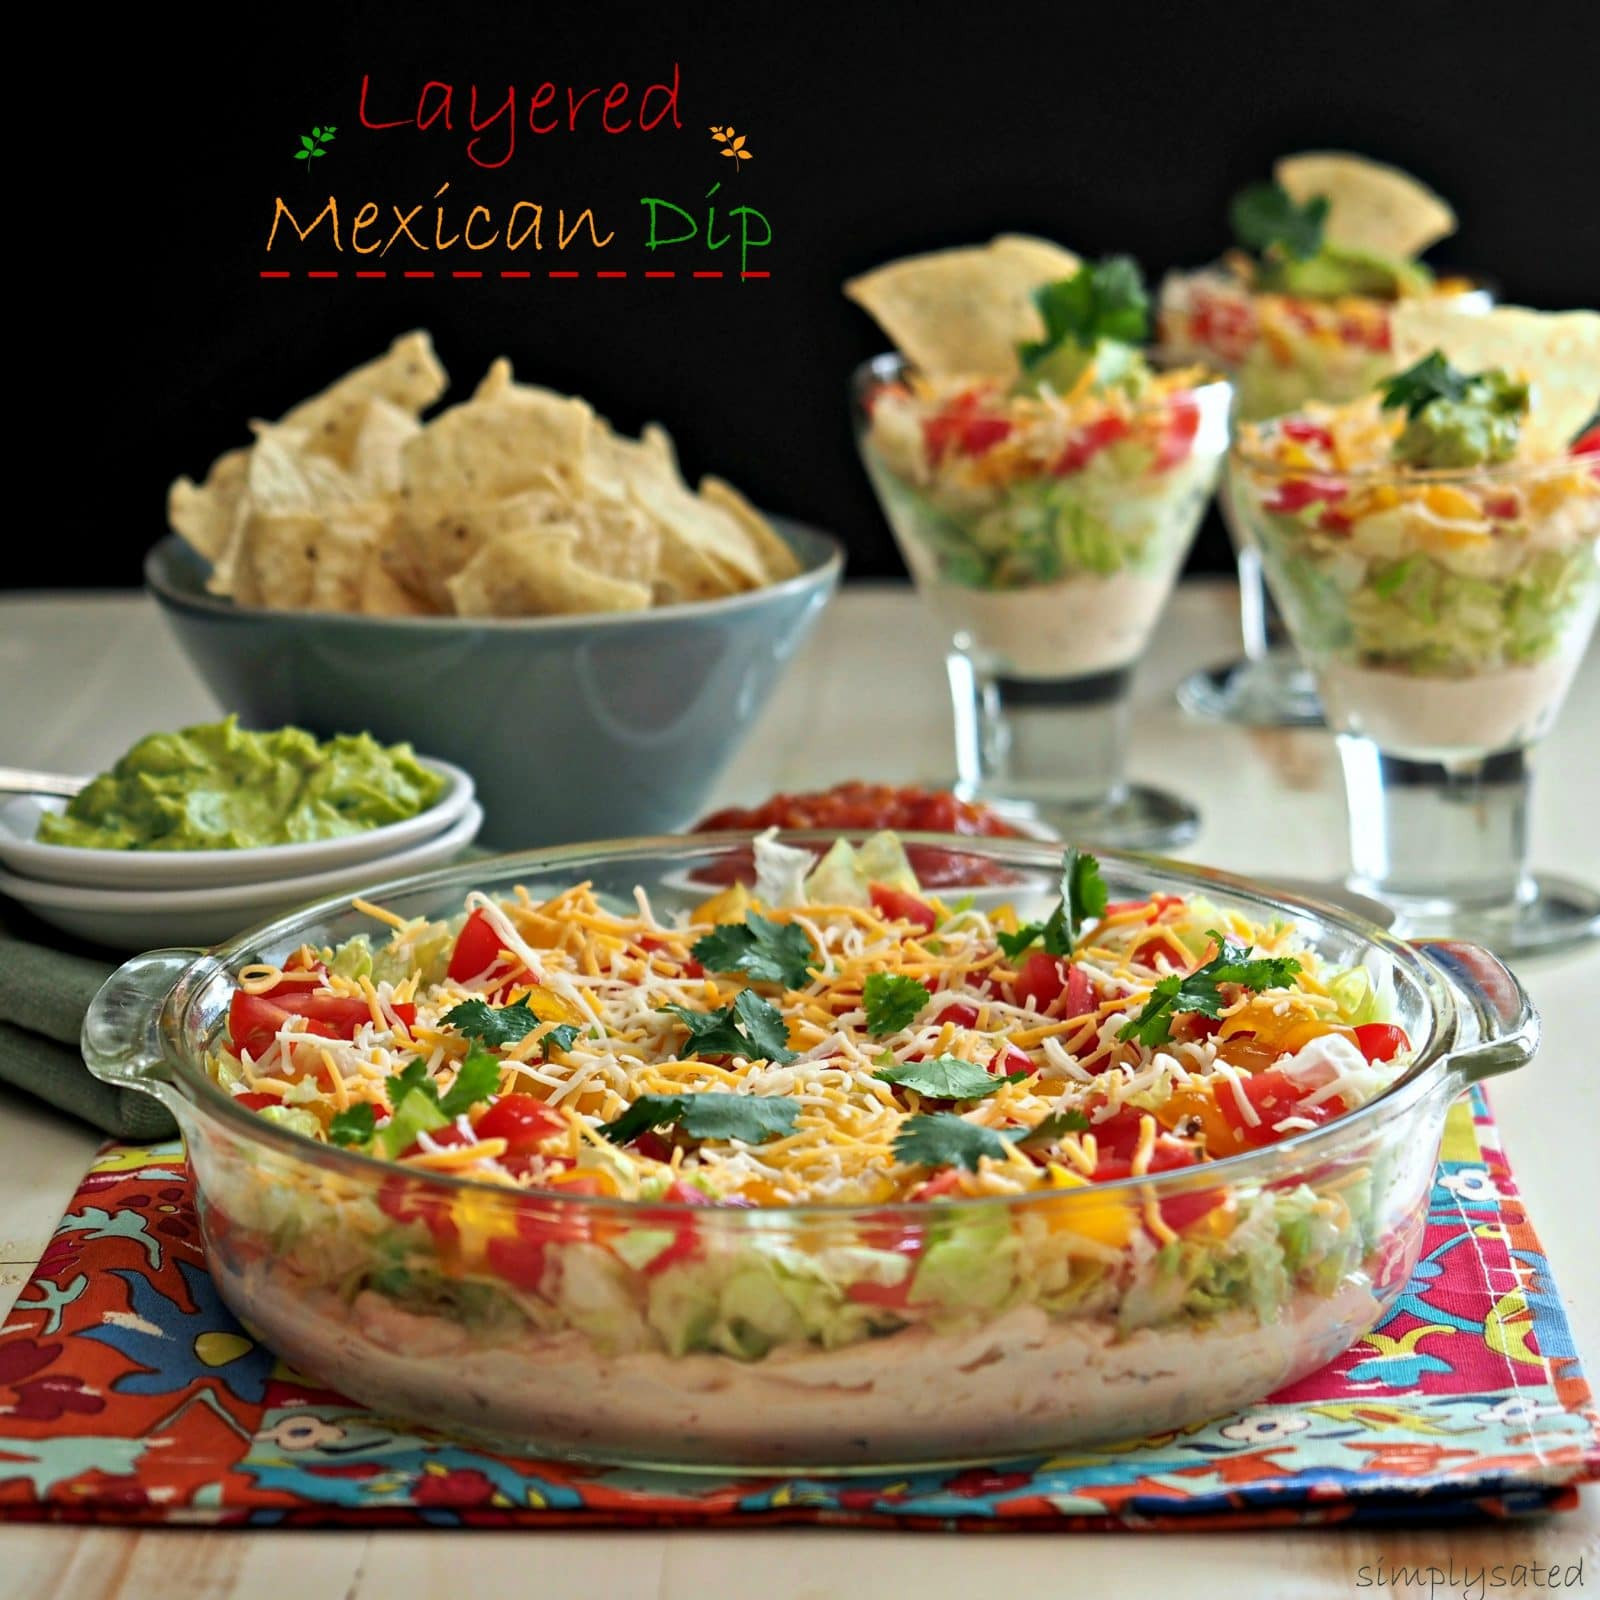 Easy Mexican Dip Recipes
 Layered Mexican Dip Simply Sated